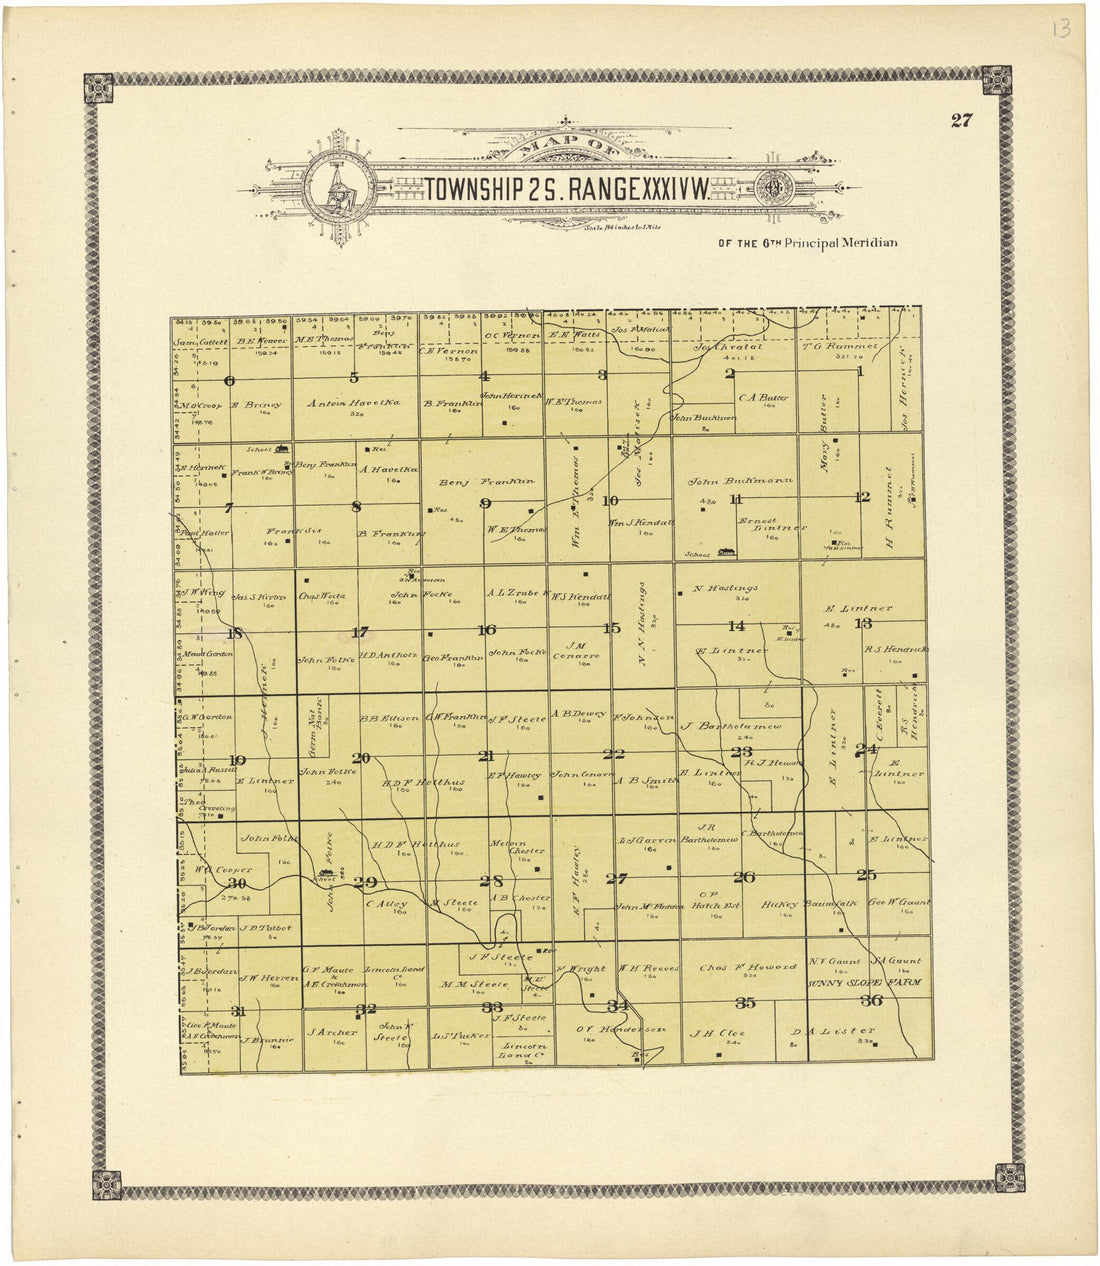 This old map of Map of Township 2 S. Range XXXIV W. from Standard Atlas of Rawlins County, Kansas from 1906 was created by  Geo. A. Ogle &amp; Co in 1906